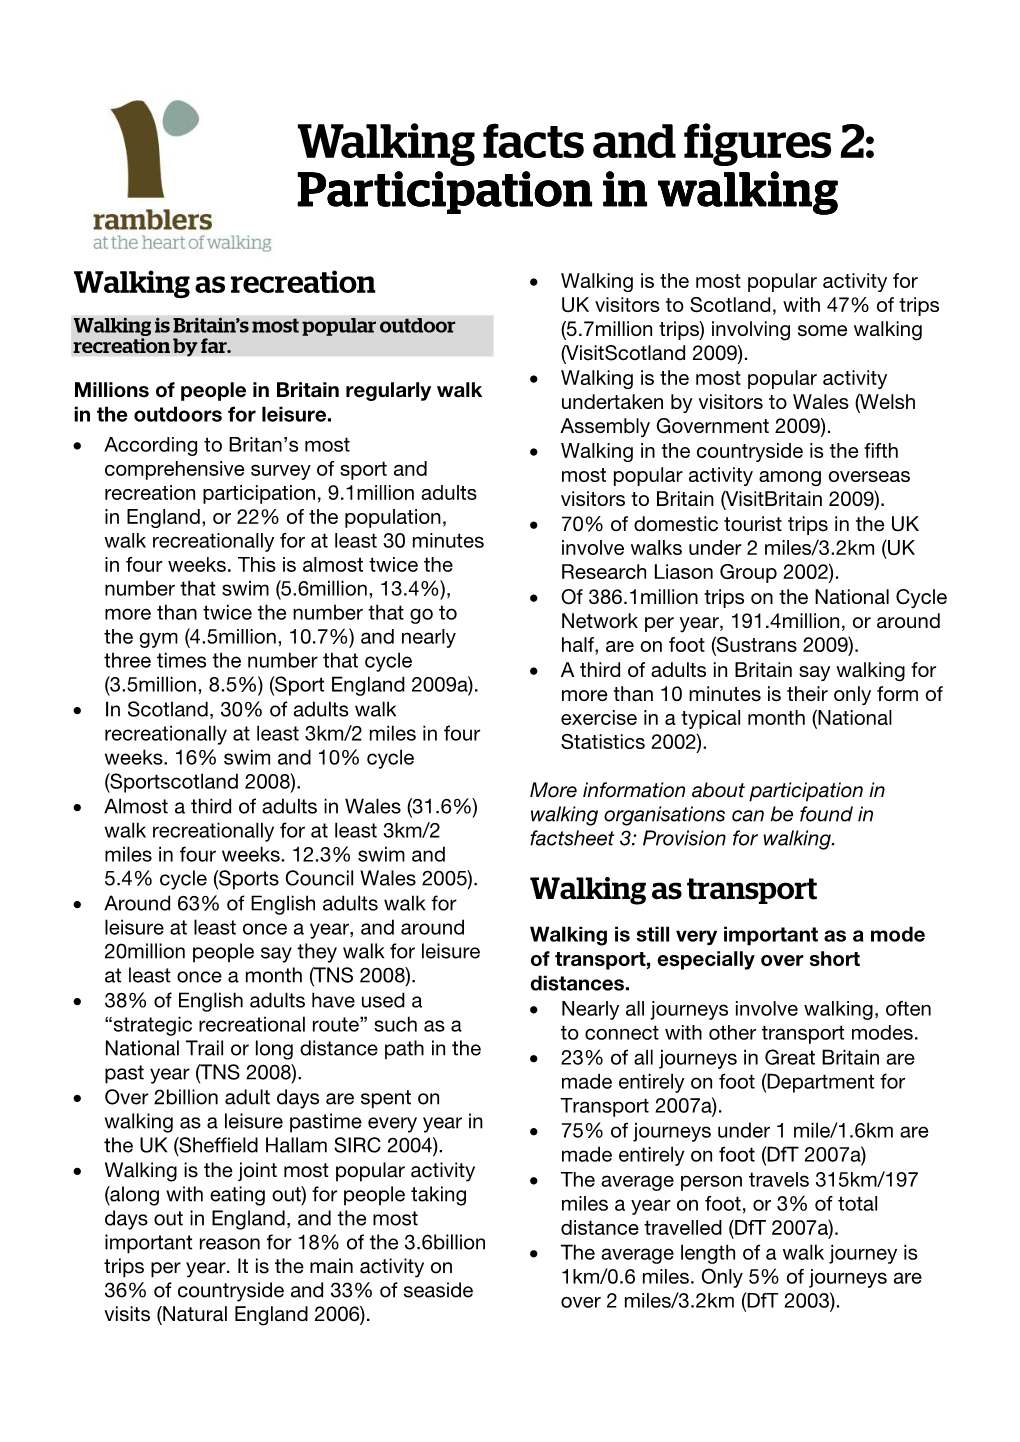 Walking Facts and Figures 2: Participatio Participation